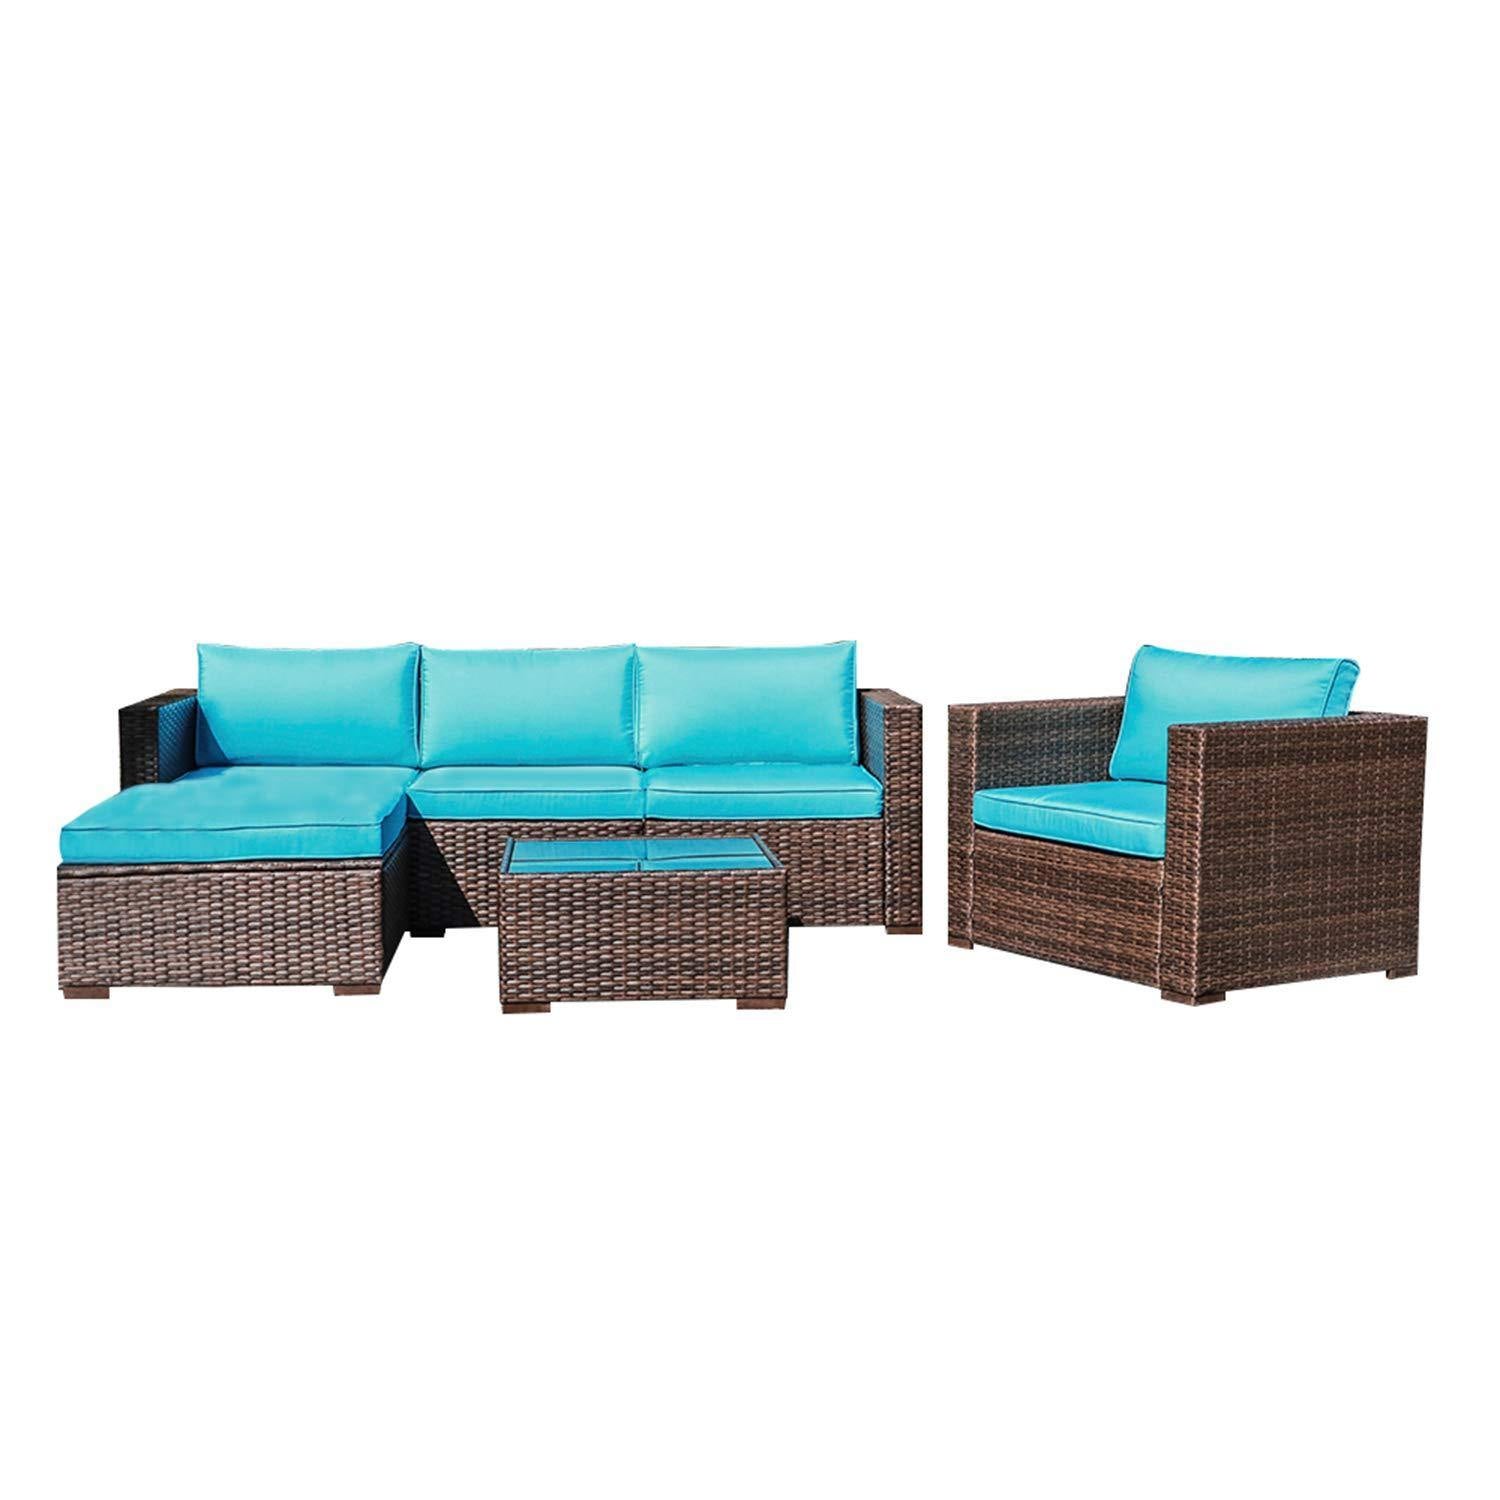 Adonis-III 6-pc. Outdoor Sectional Set with Turquoise Cushions - OrangeCasual